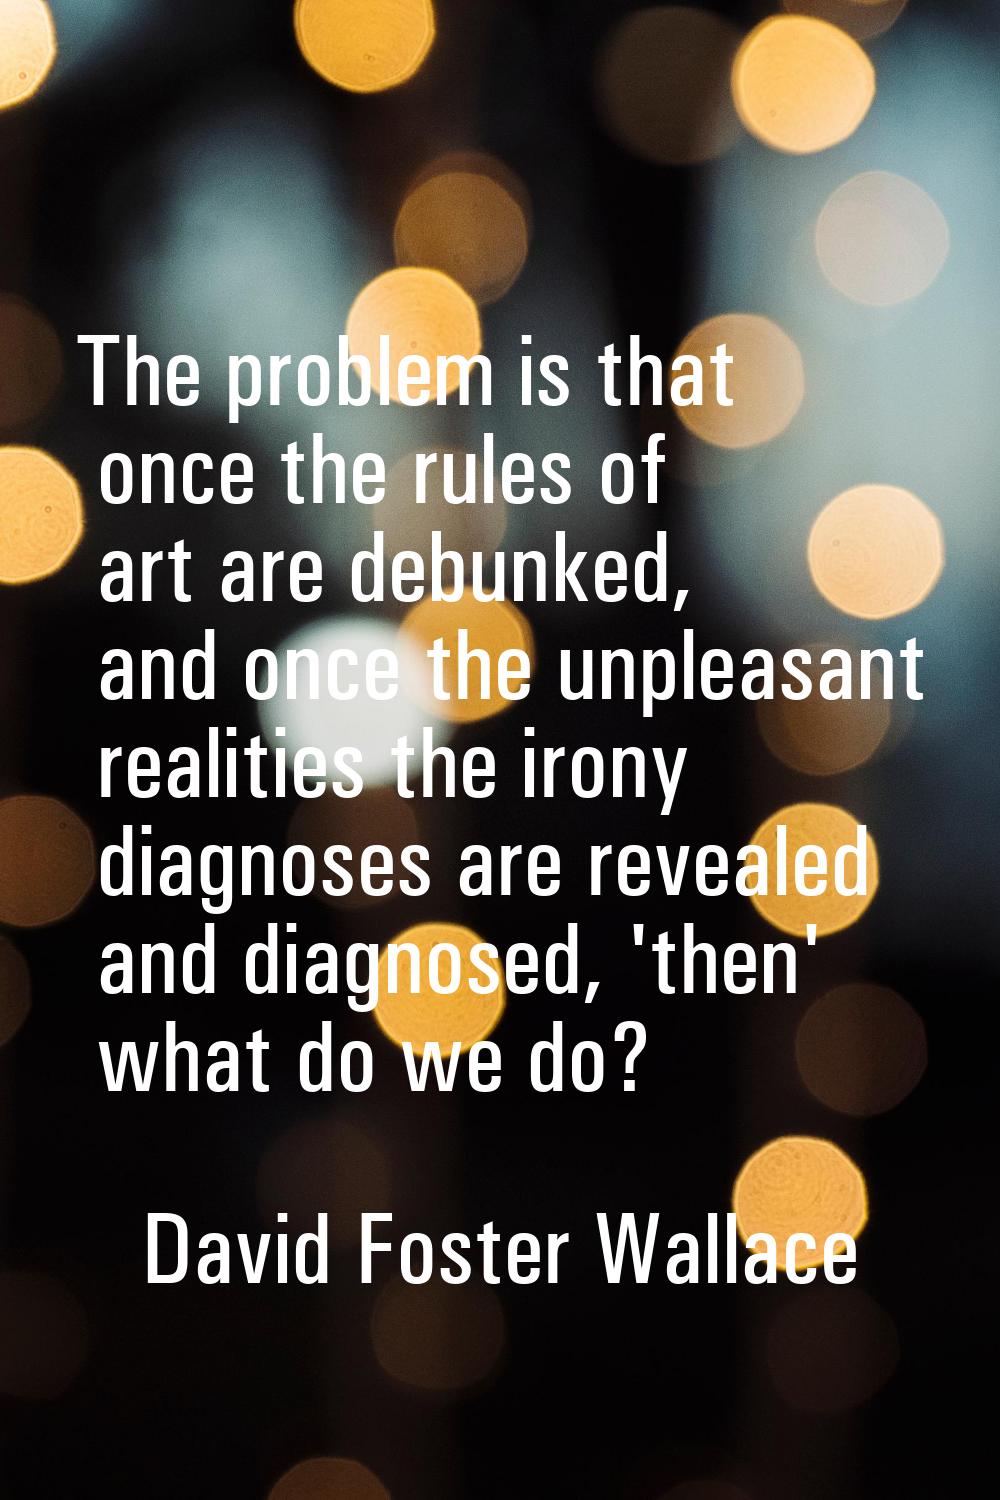 The problem is that once the rules of art are debunked, and once the unpleasant realities the irony